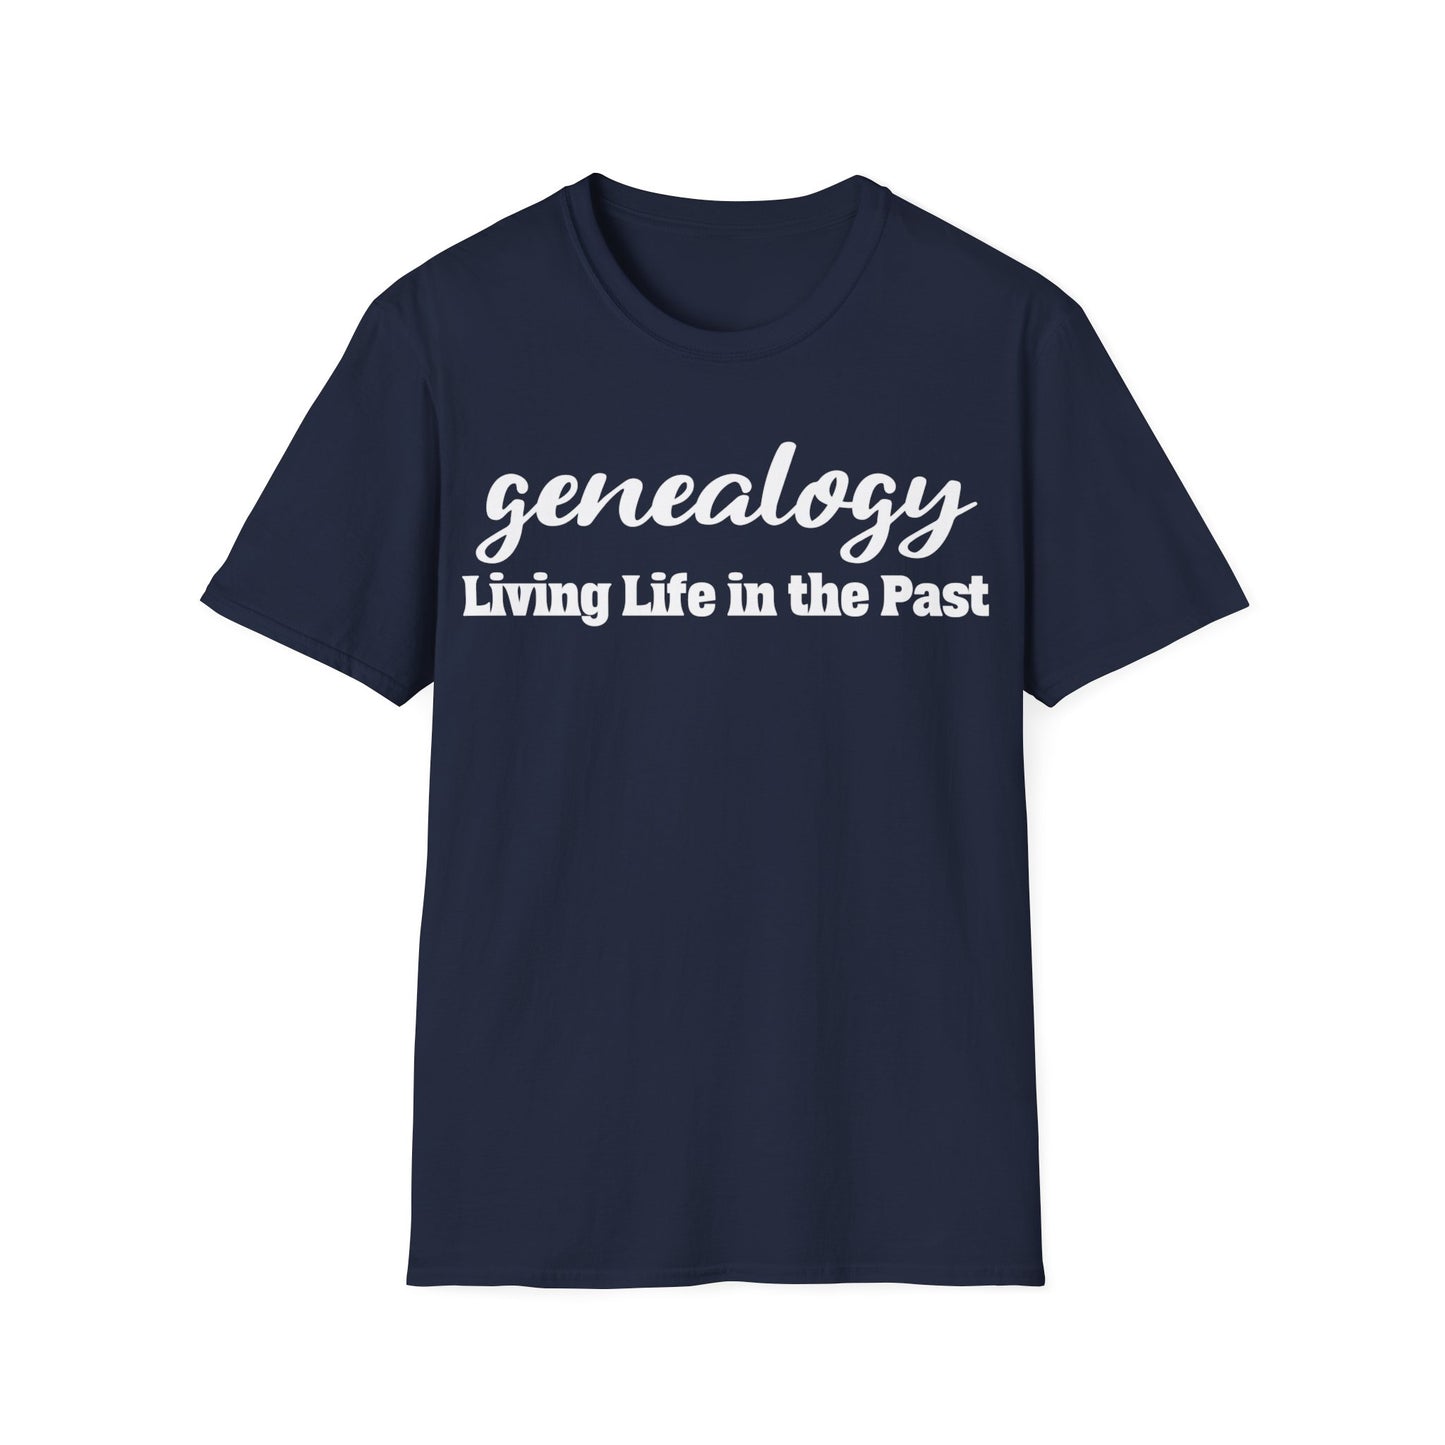 Genealogy-Living Life in the Past